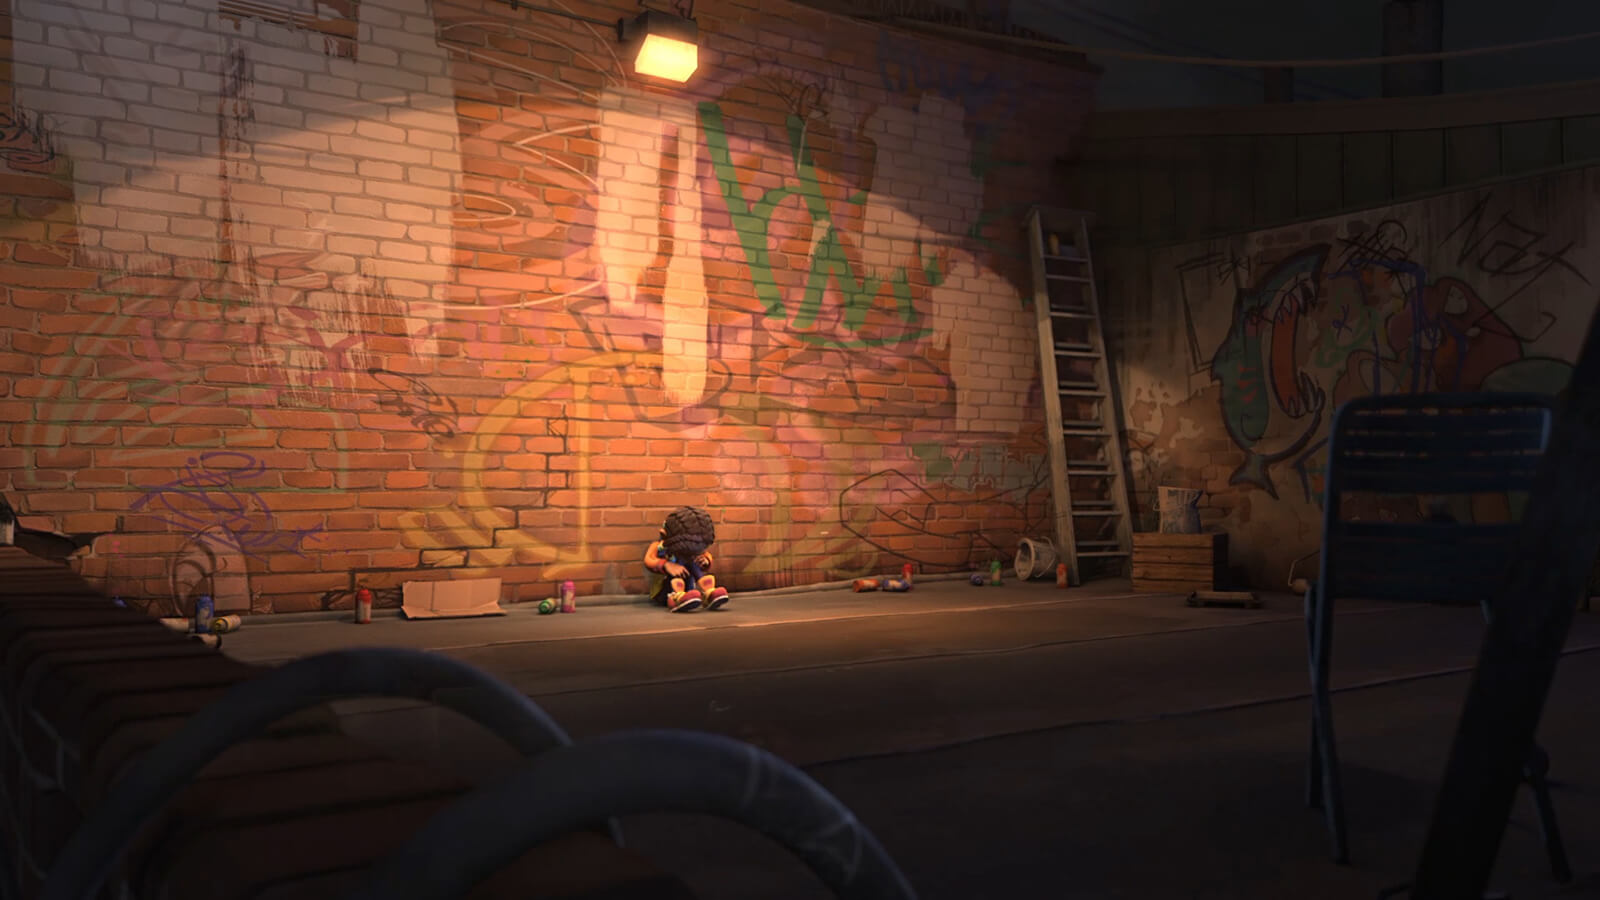 A young girl sits sadly against a brick wall covered in graffiti, near cans of spray paint, lit from a single light above